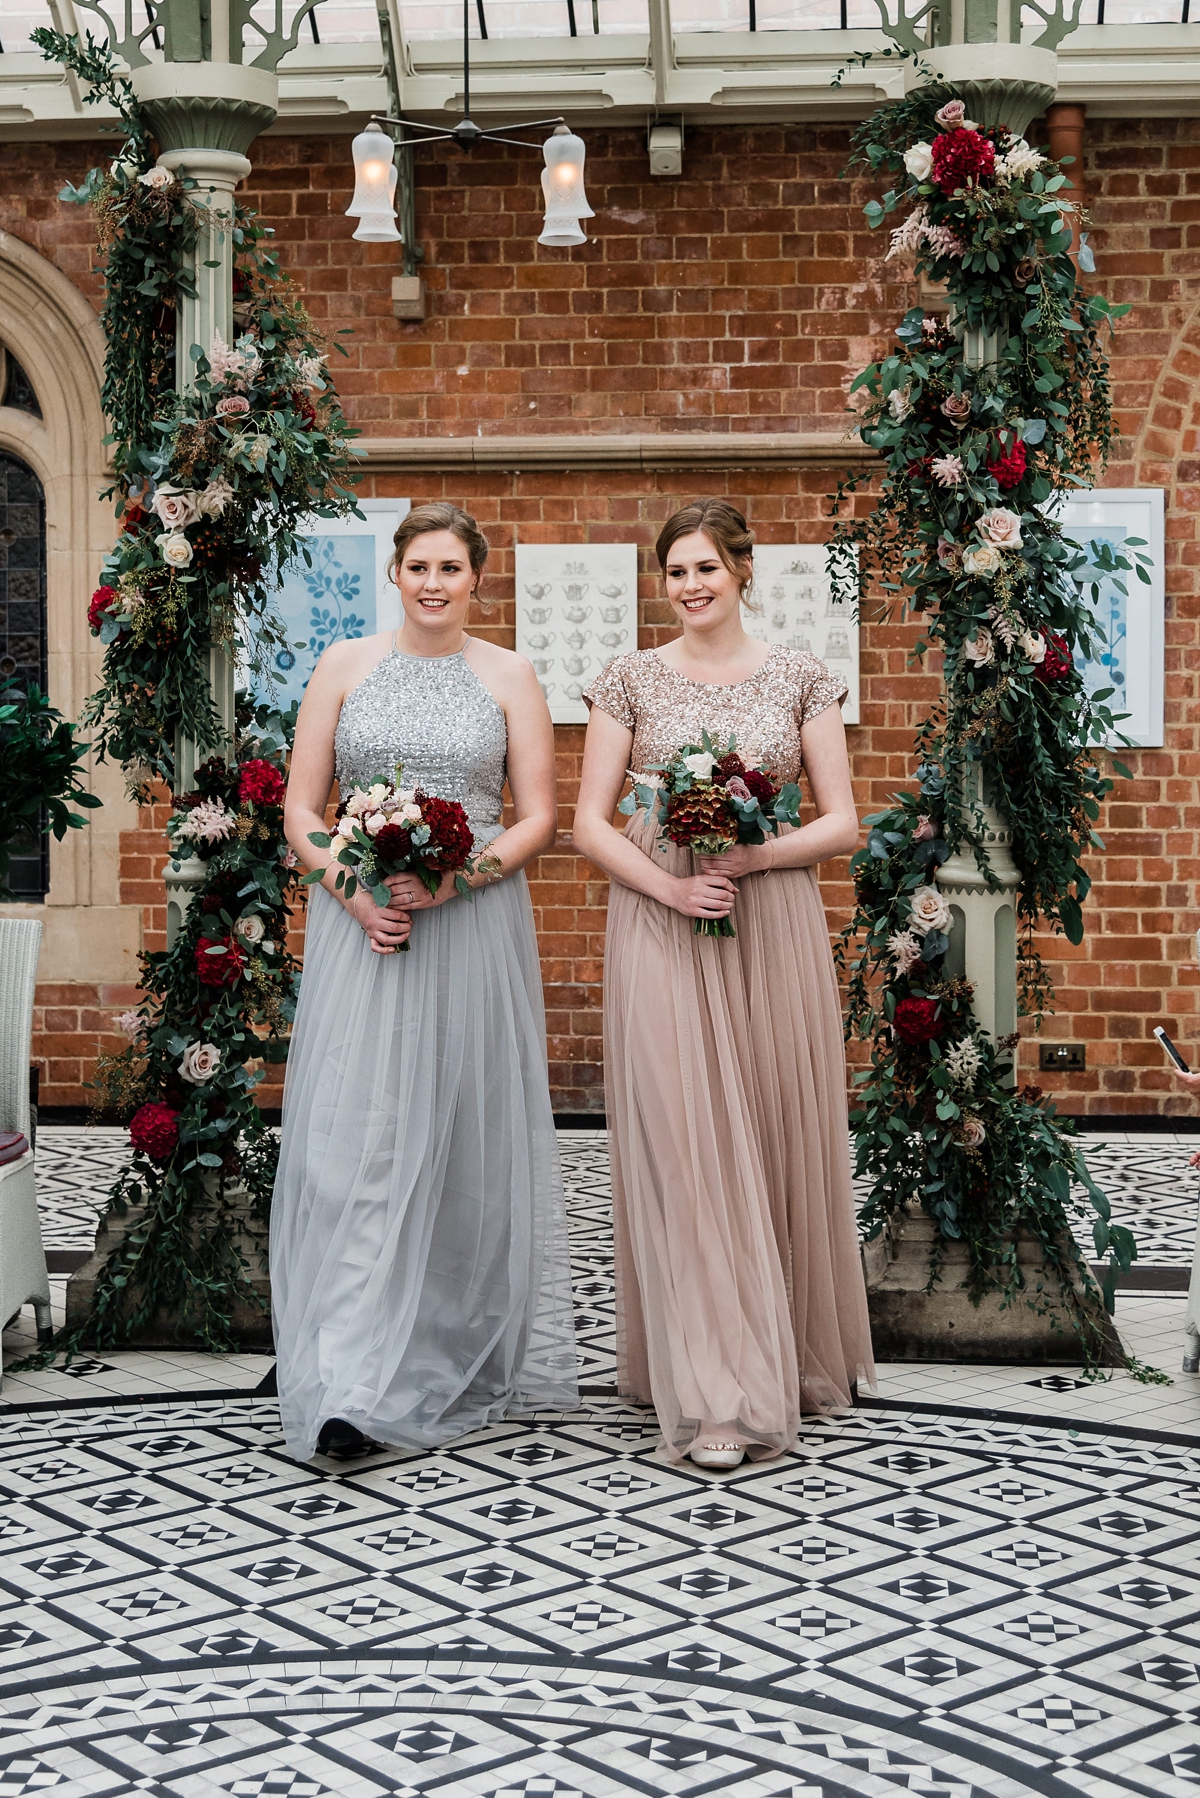 21 Bridesmaids in sparkly sequin dresses from Mya via ASOS. Images by Su Ann Simon